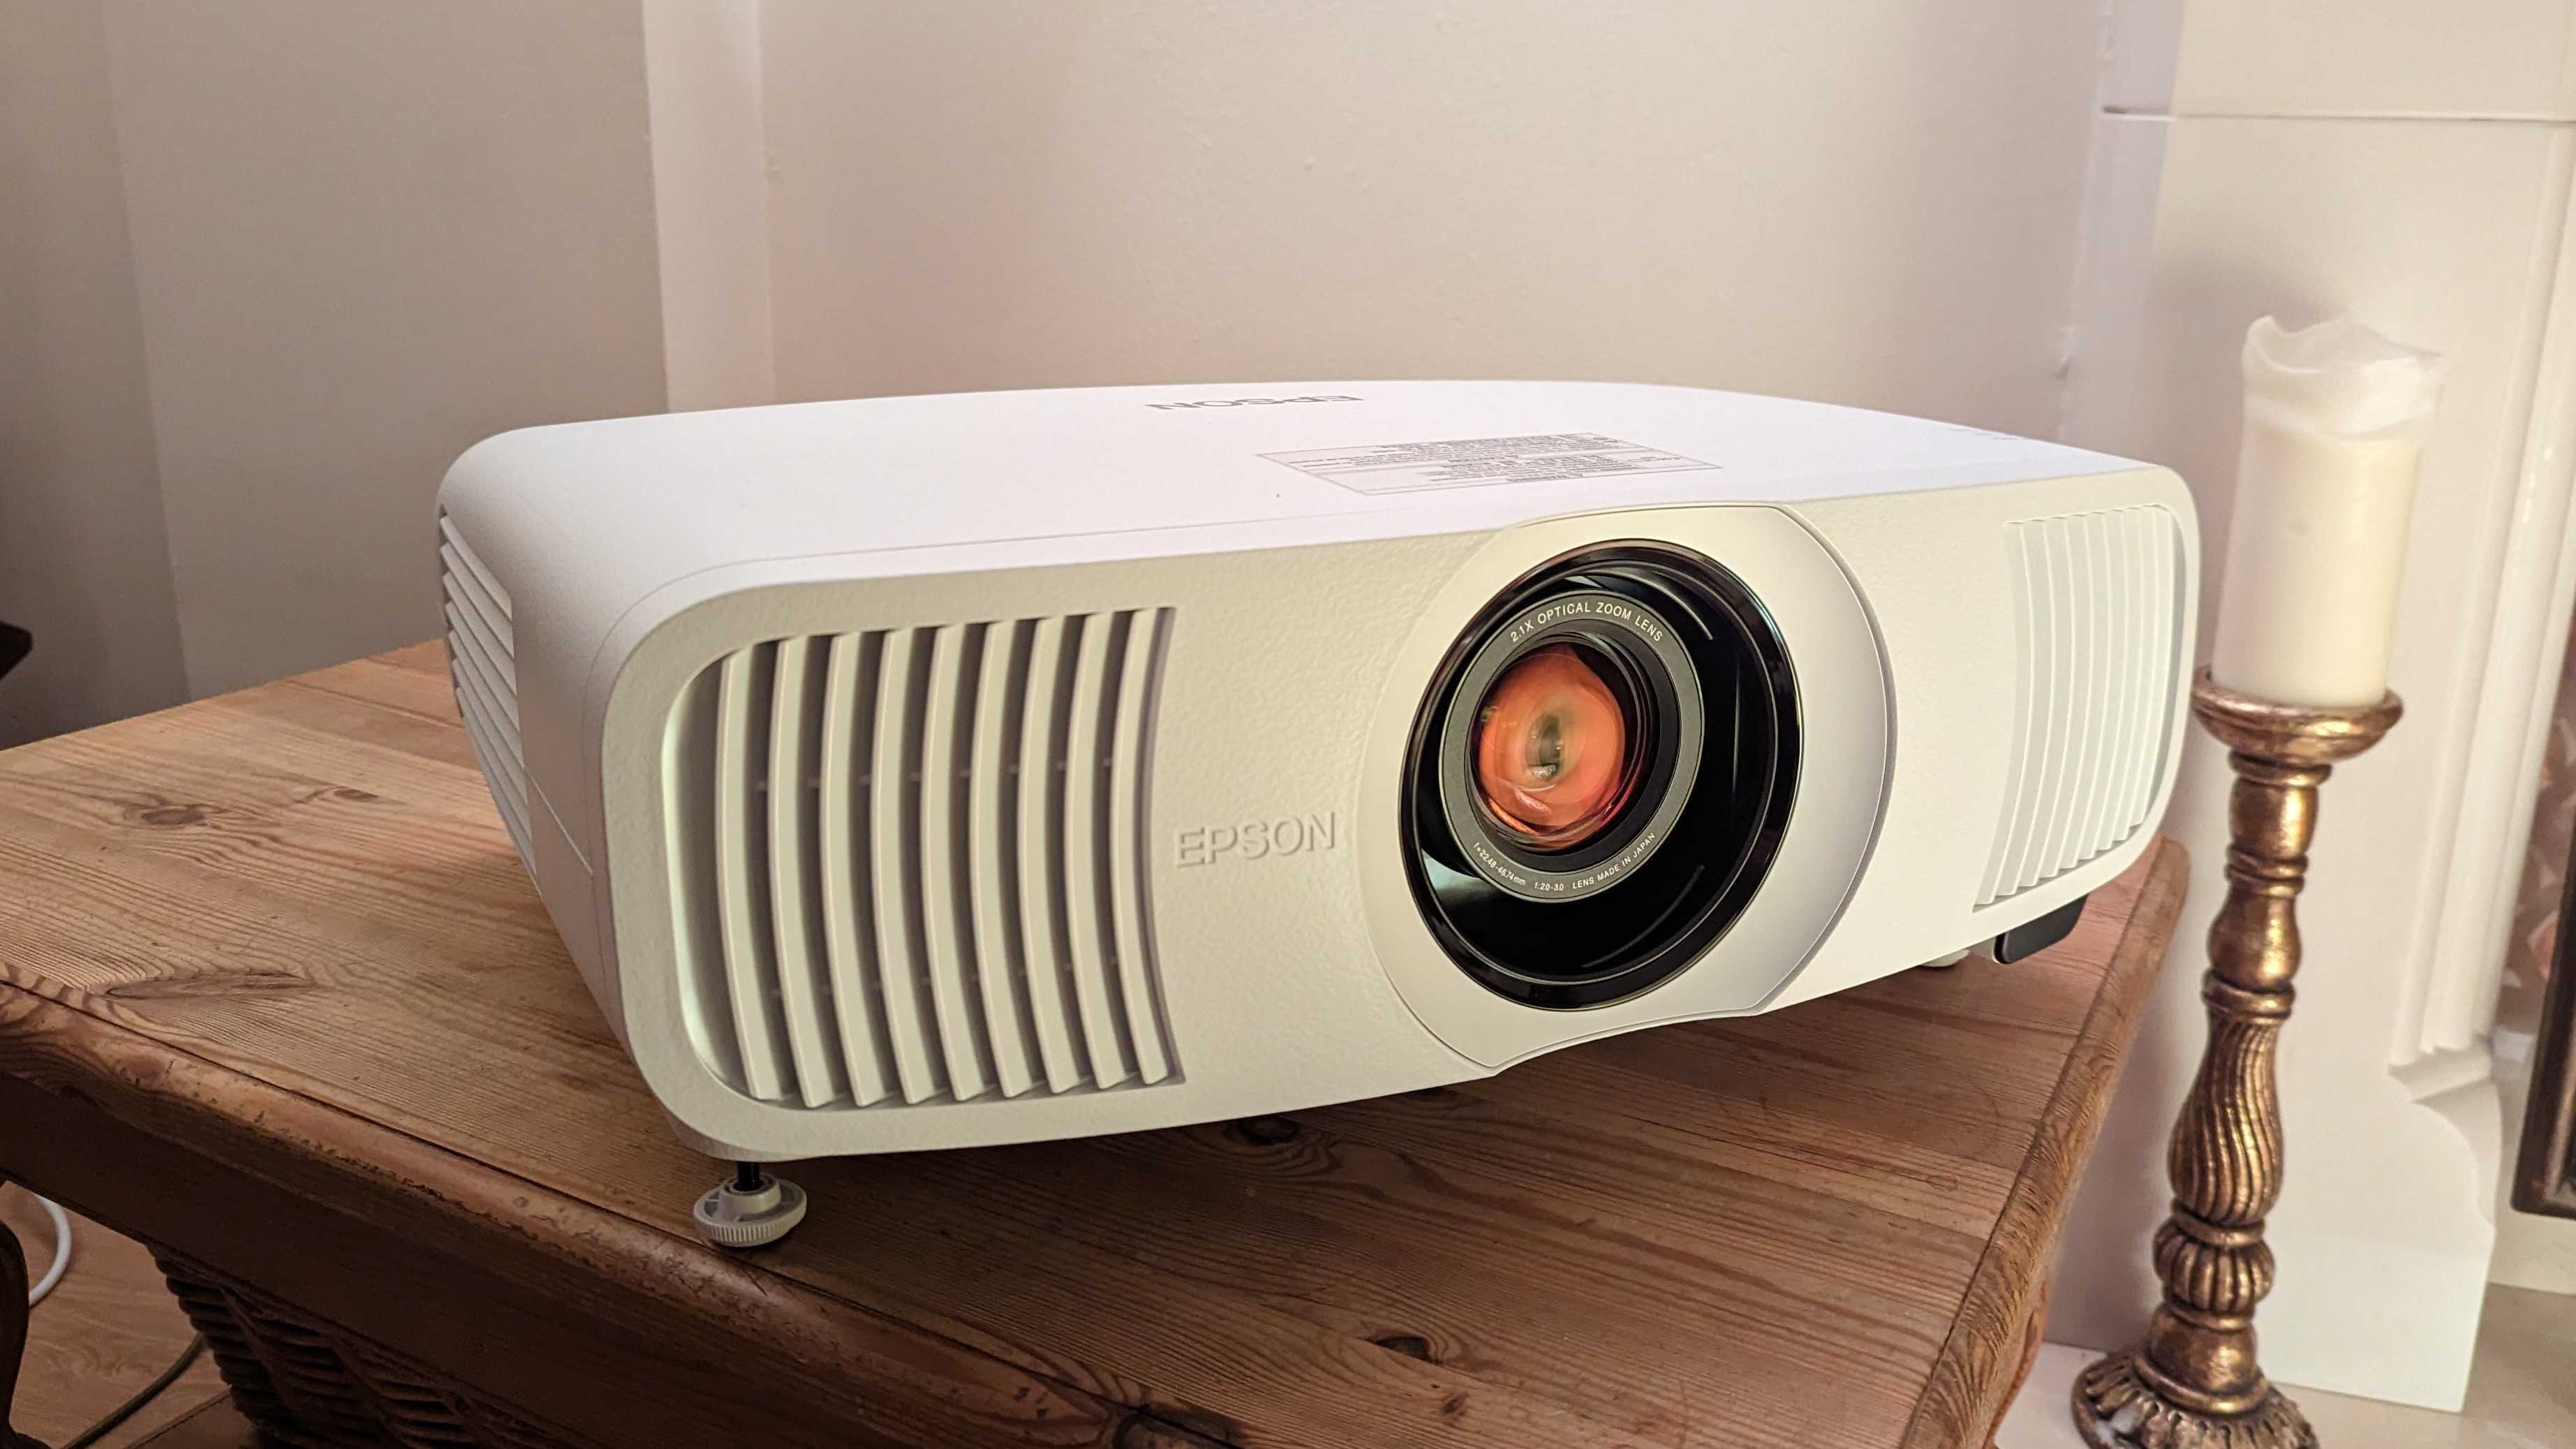 The Epson EH-LS11000W projector on a wooden table